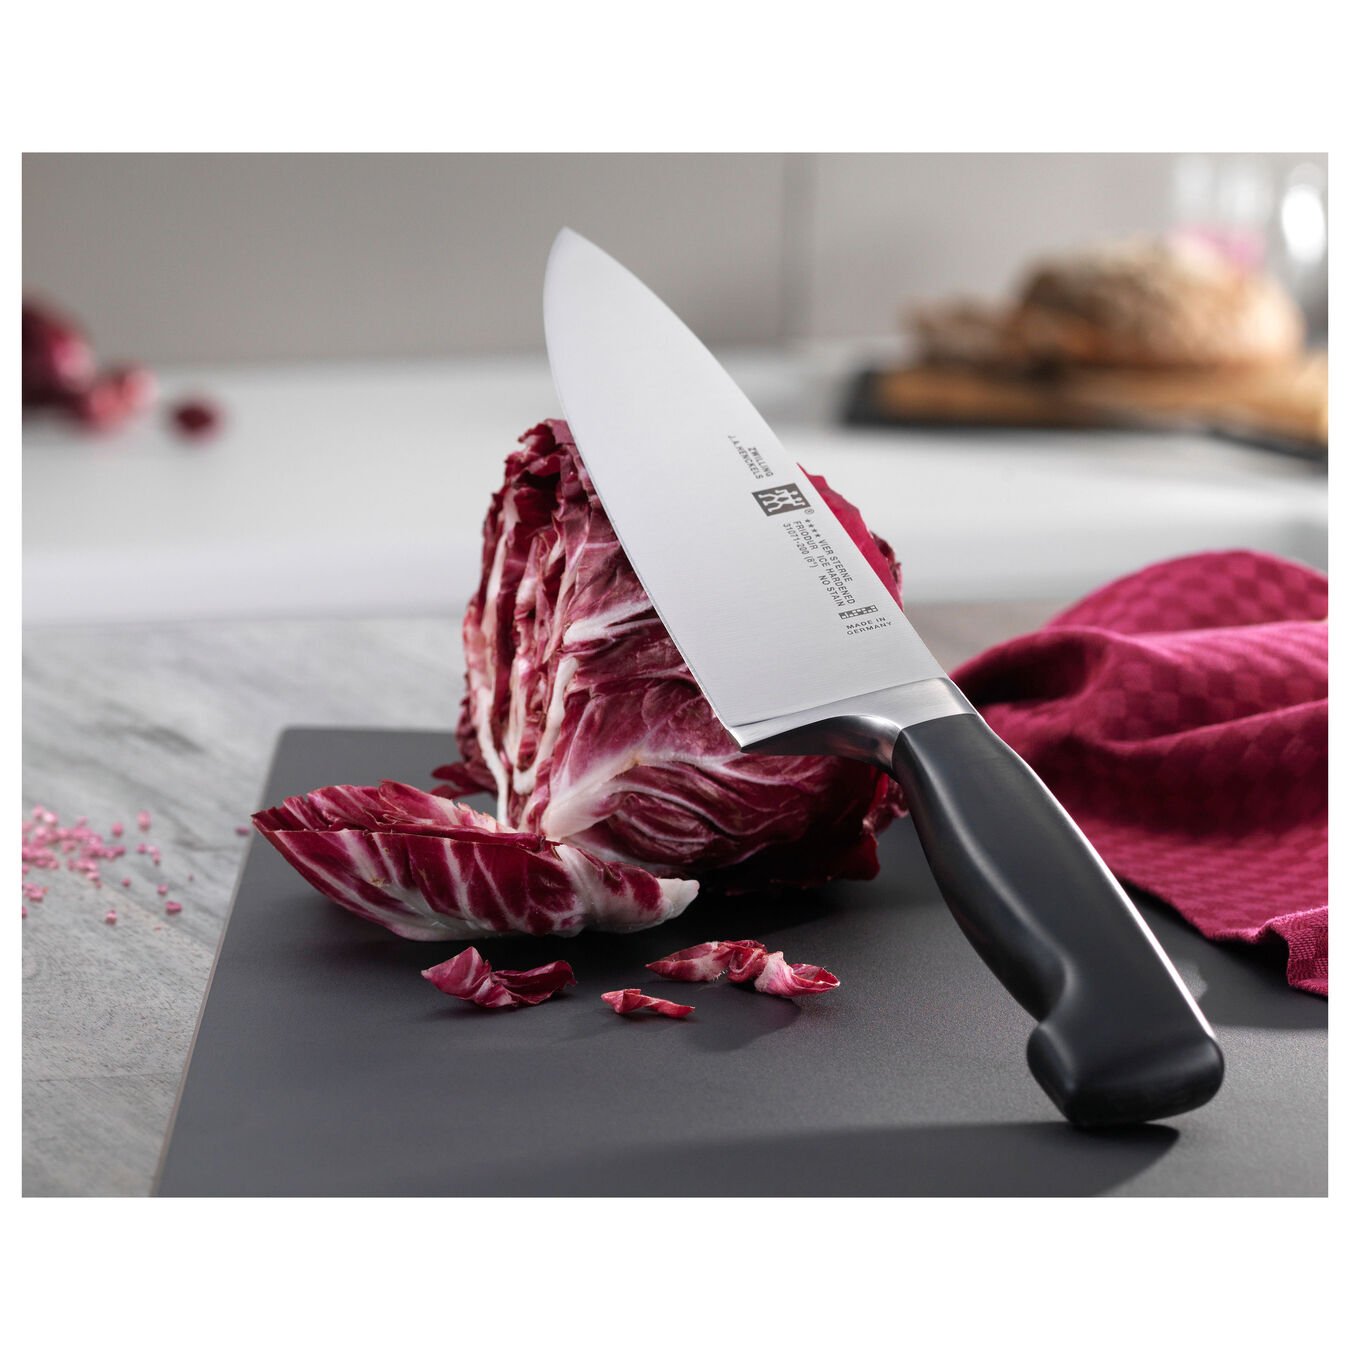 Buy ZWILLING Four Star Chef's knife | ZWILLING.COM